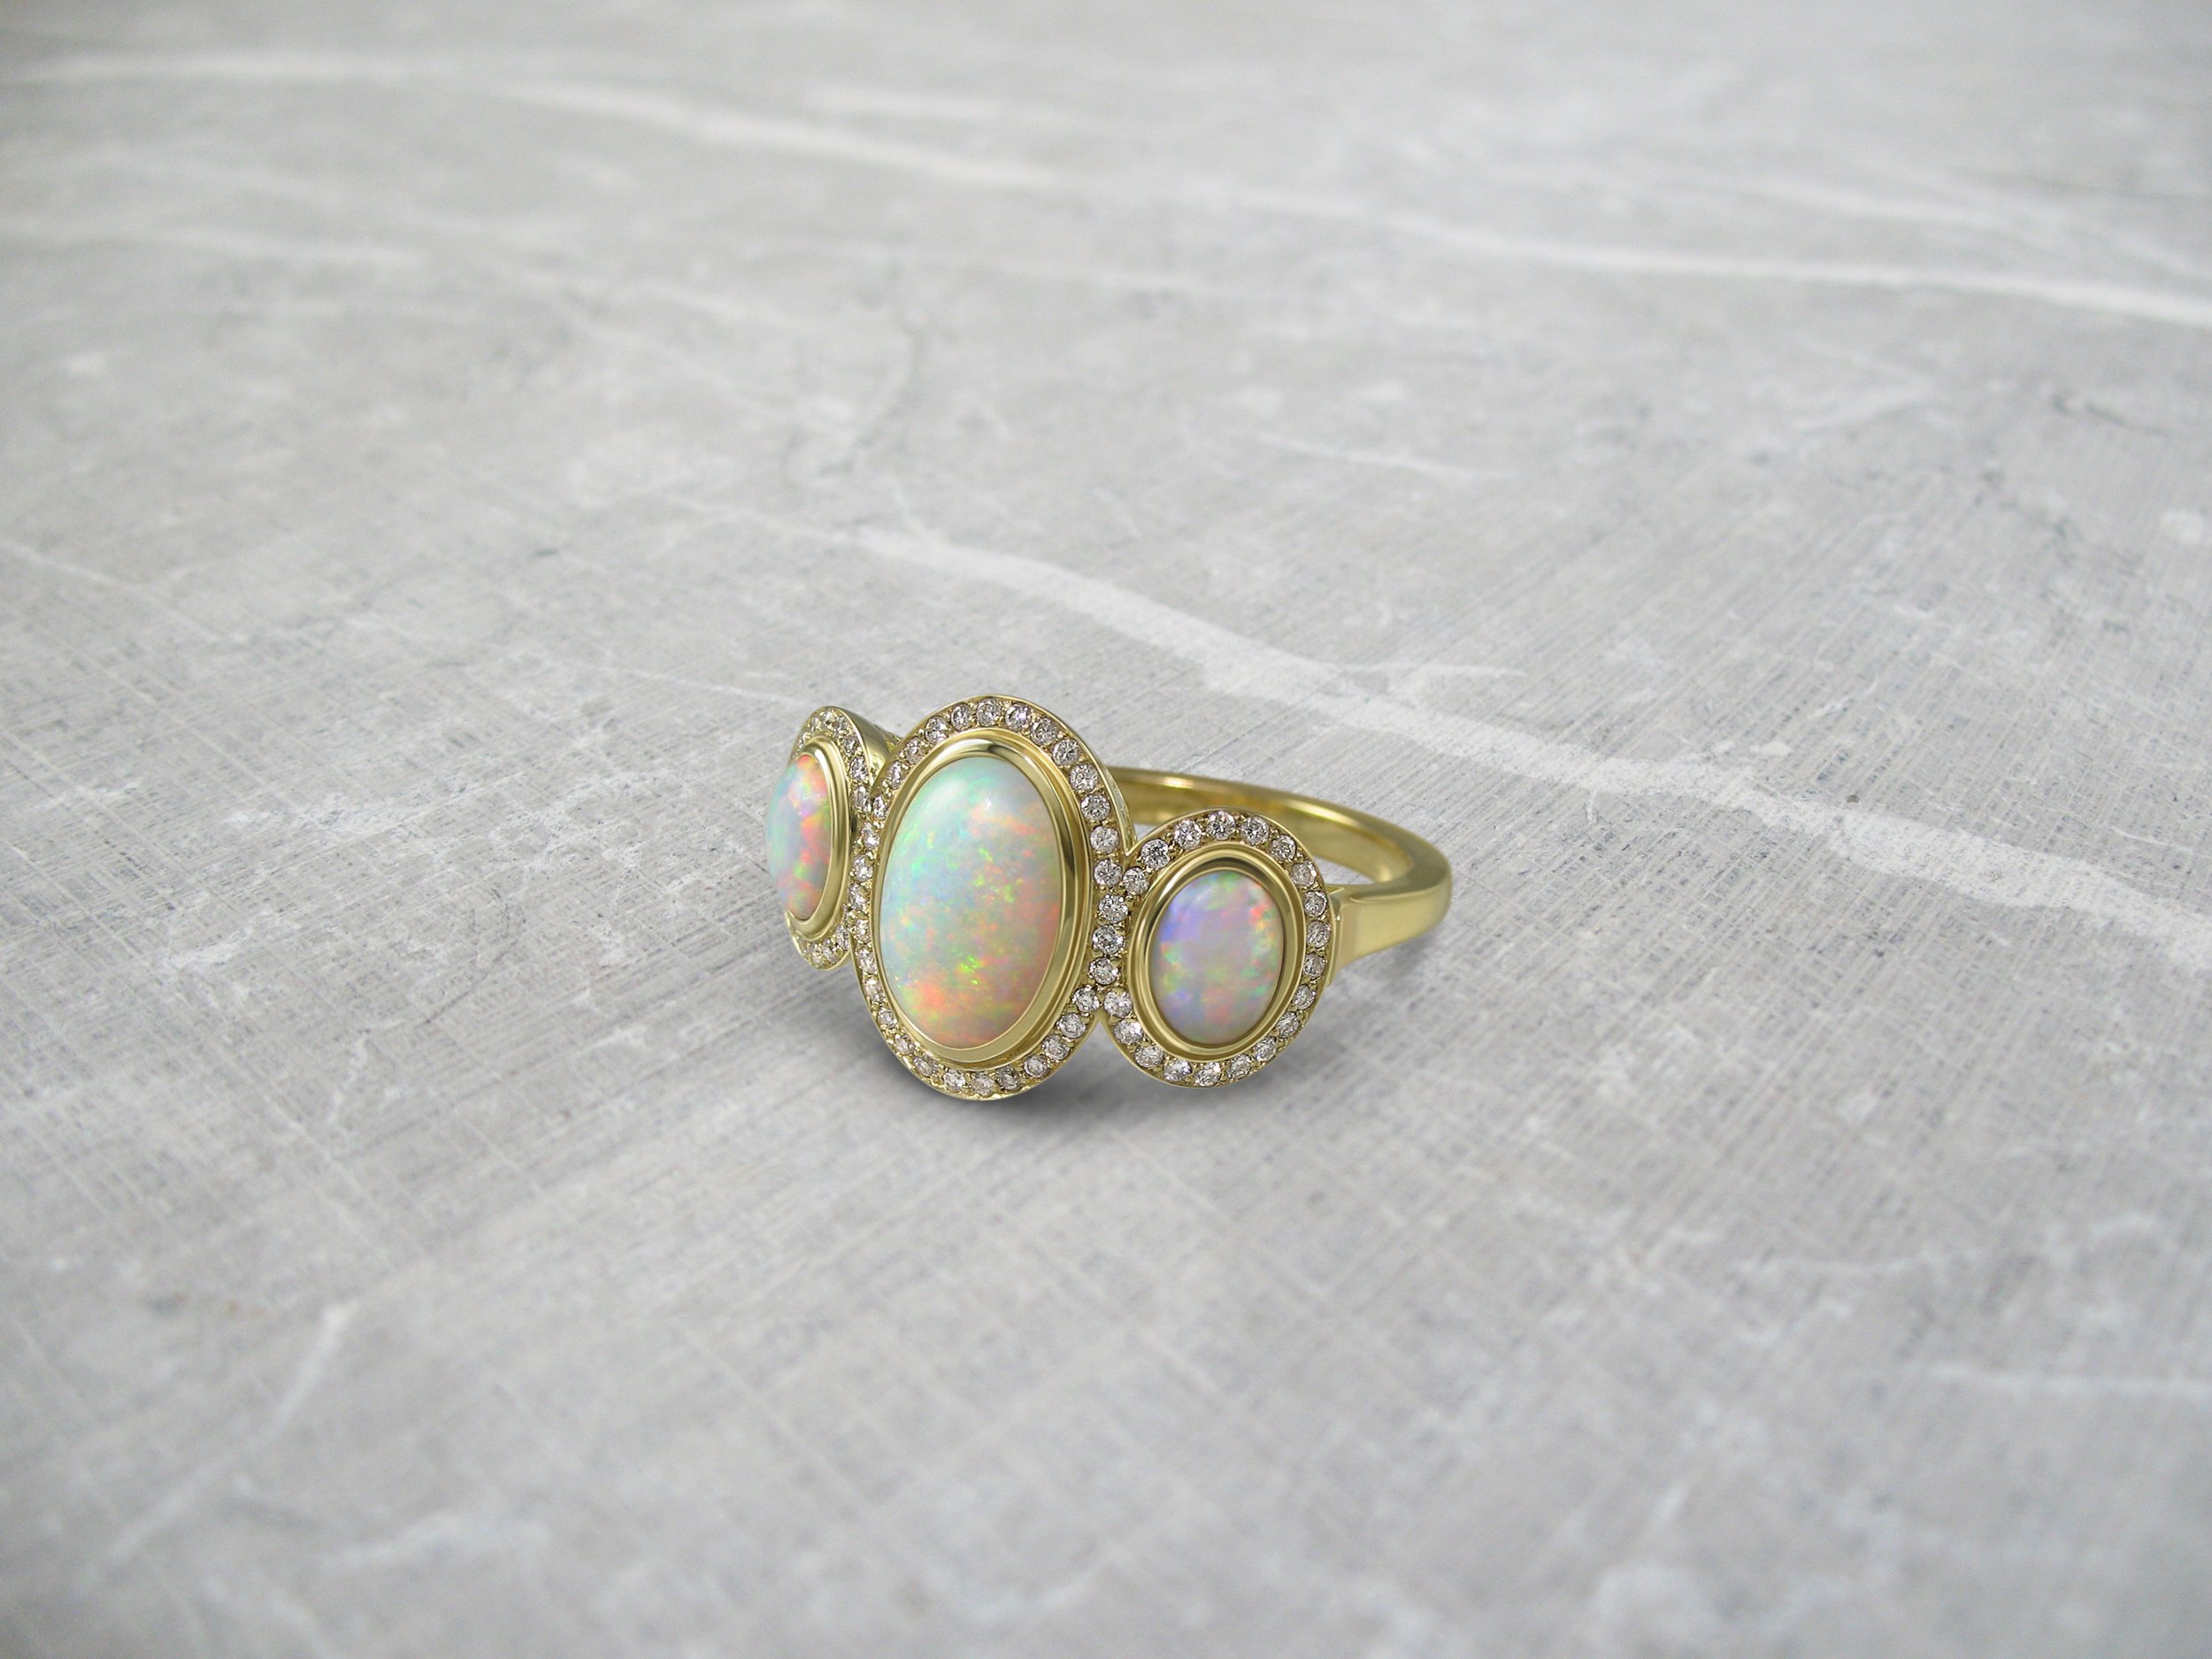 Vintage style opal and diamonds ring